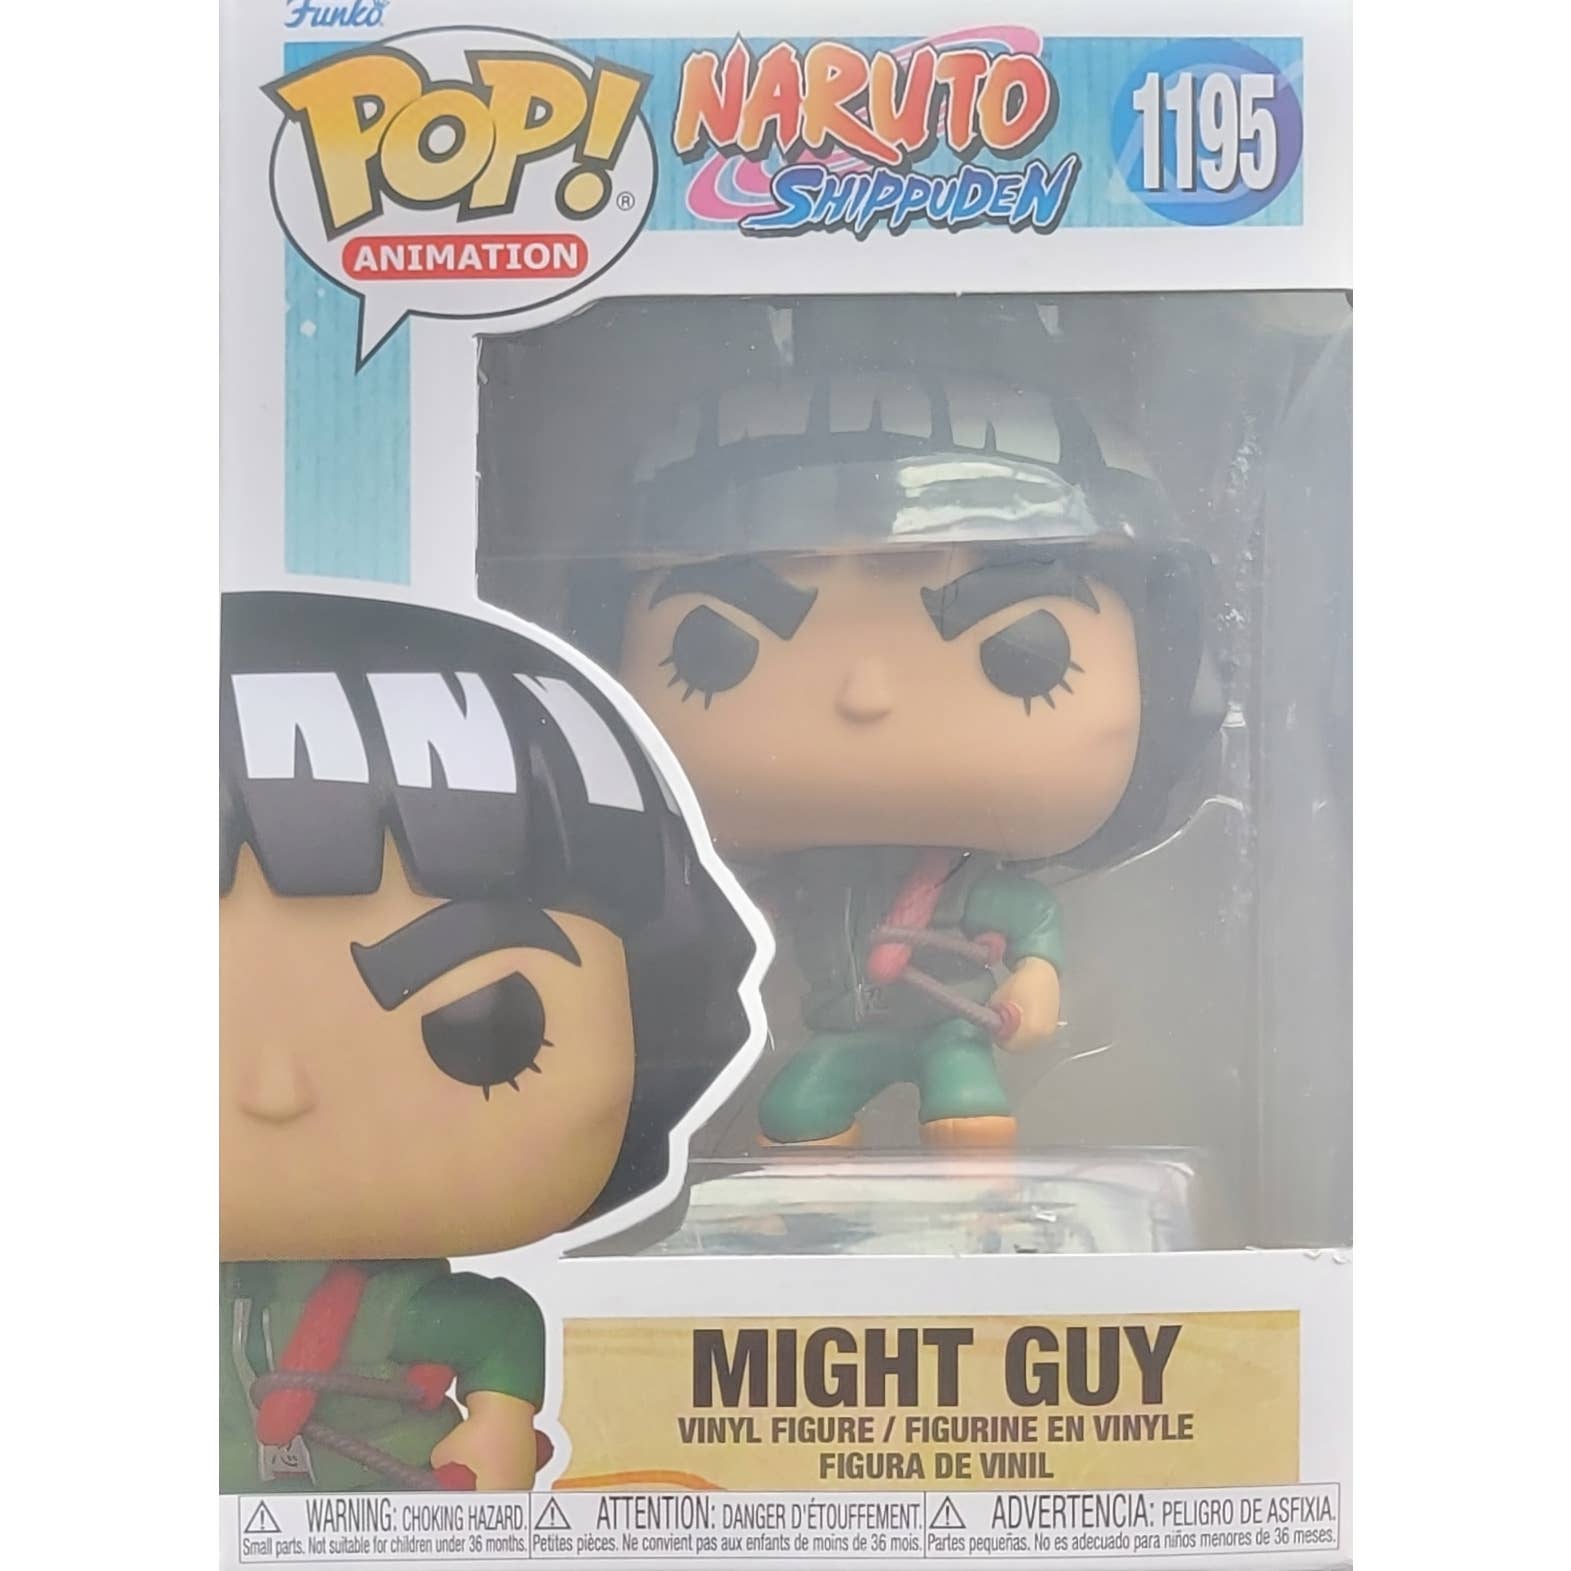 Naruto Shippuden - Might Guy (1195) - Funko Pop! - Awesome Deals Deluxe